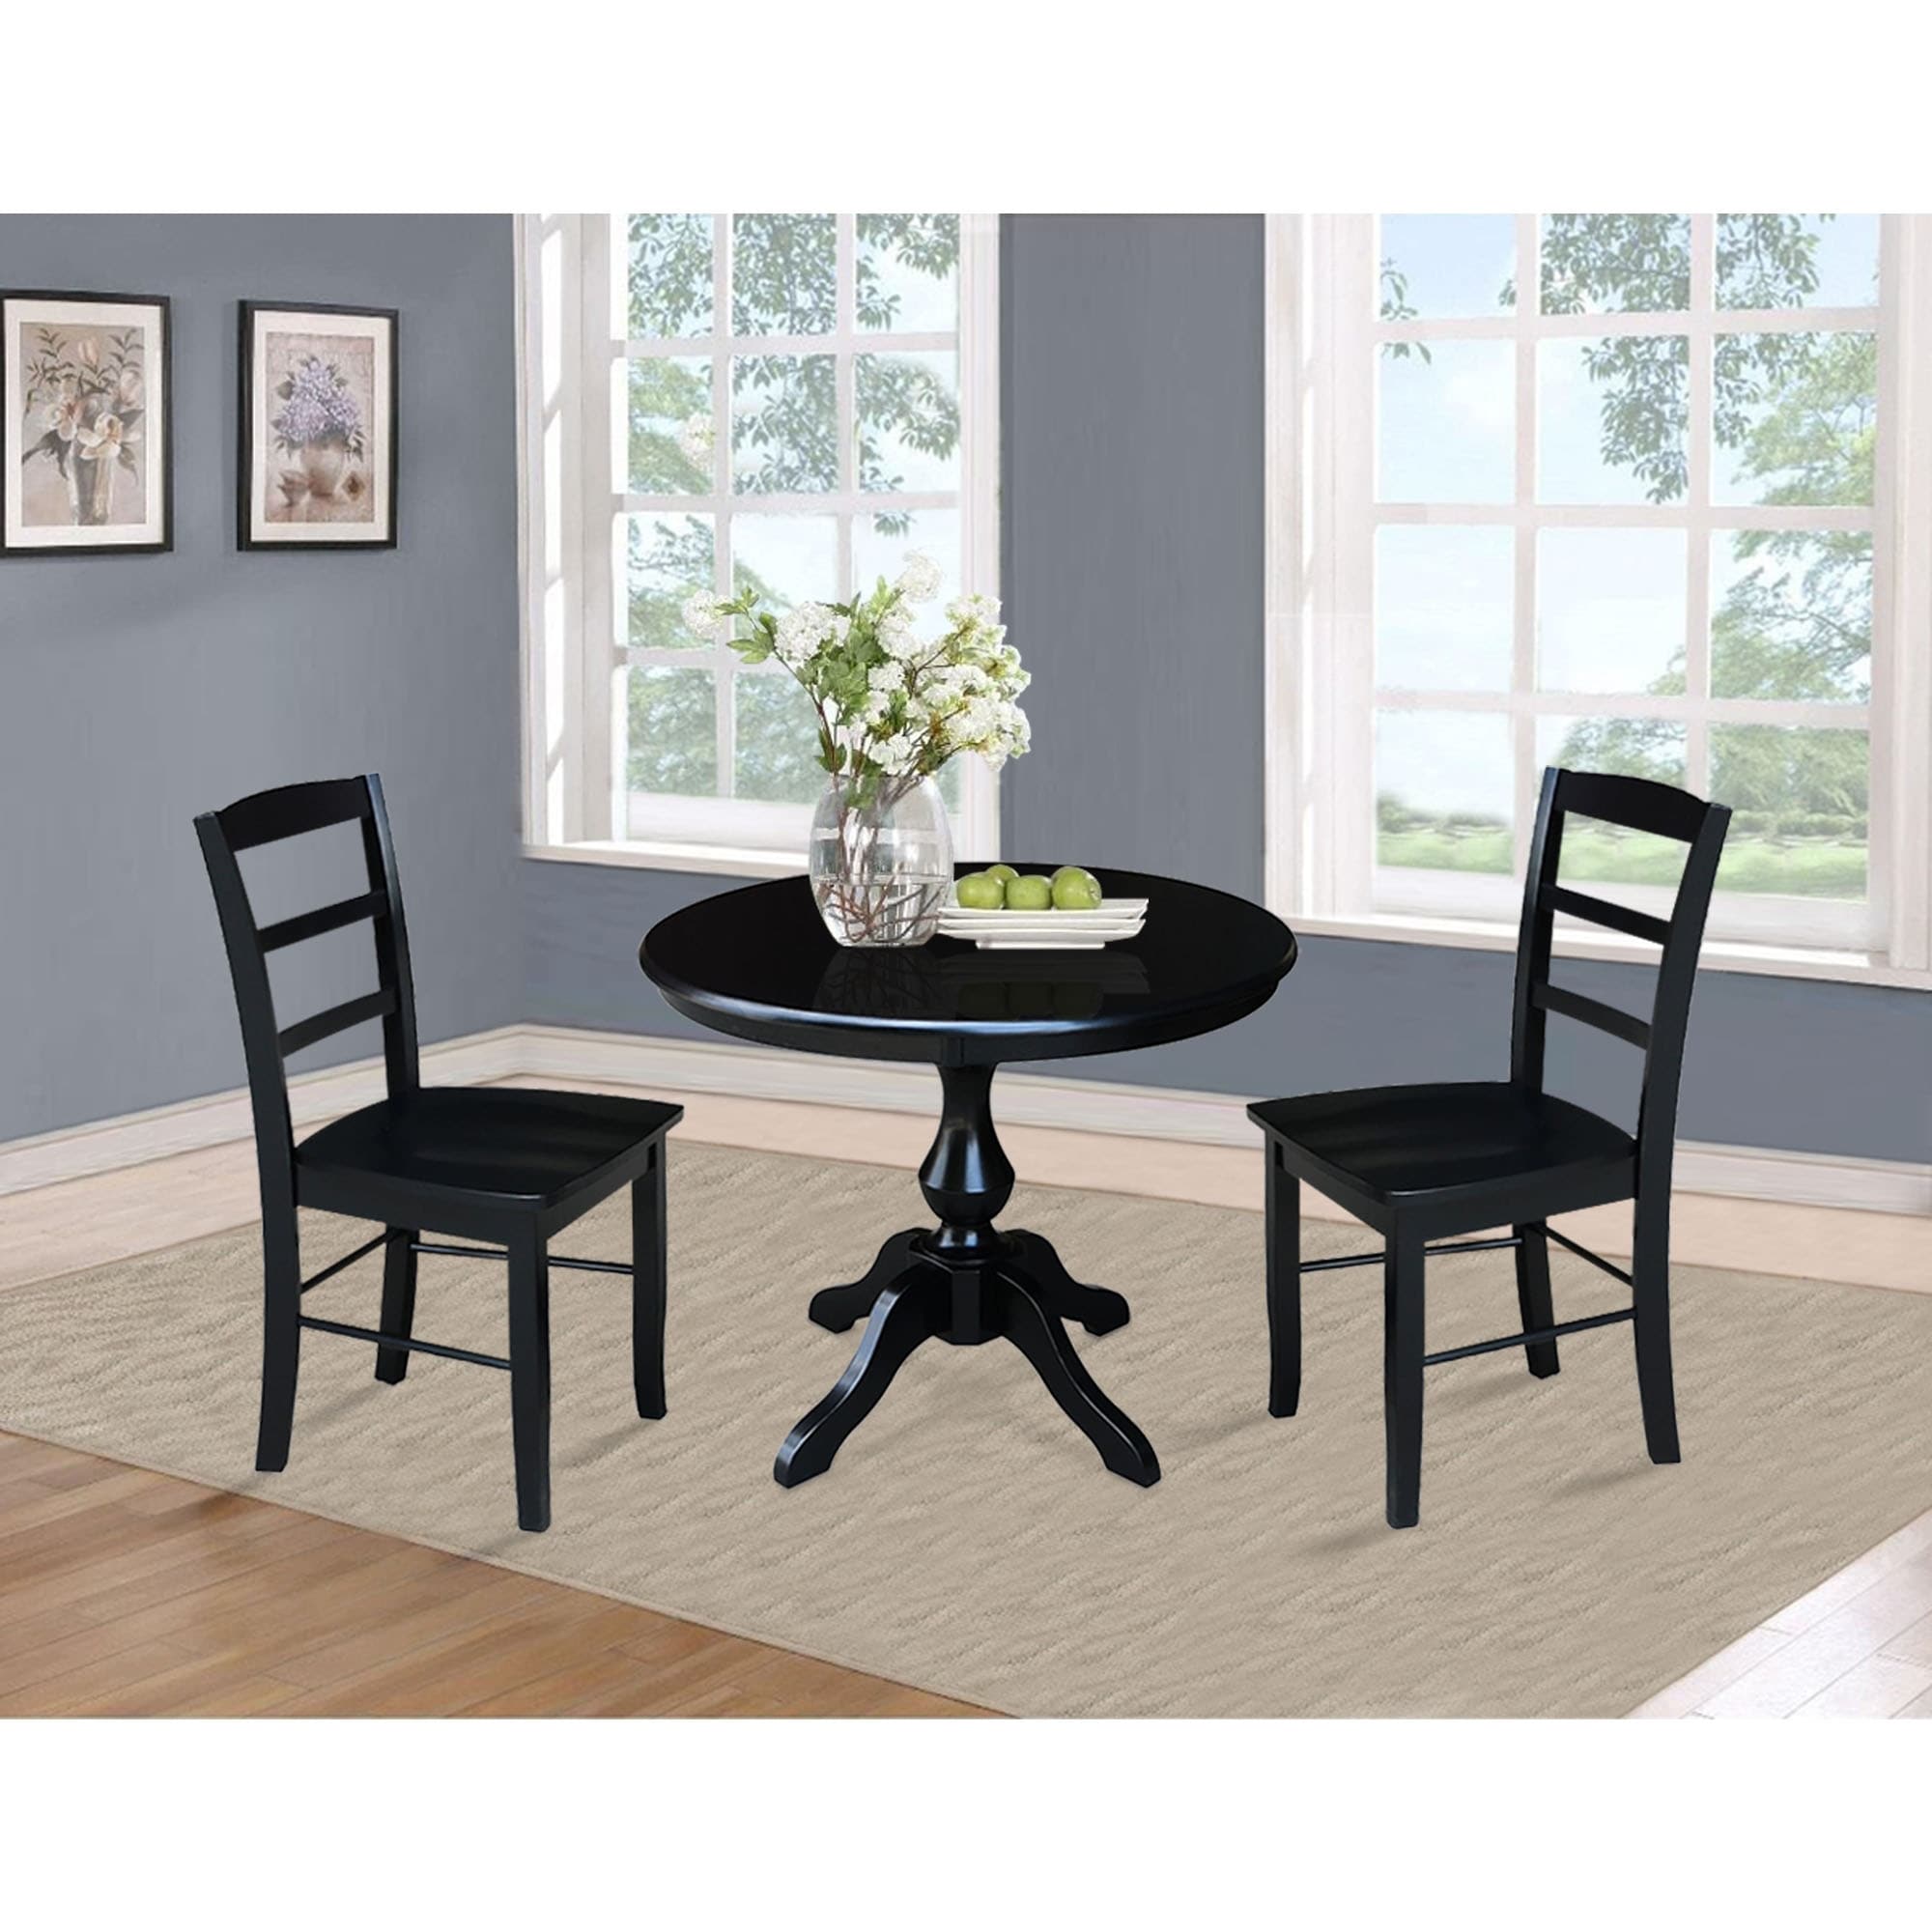 36 Round Dining Table With 2 Madrid Chairs 3 Piece Set Ebay